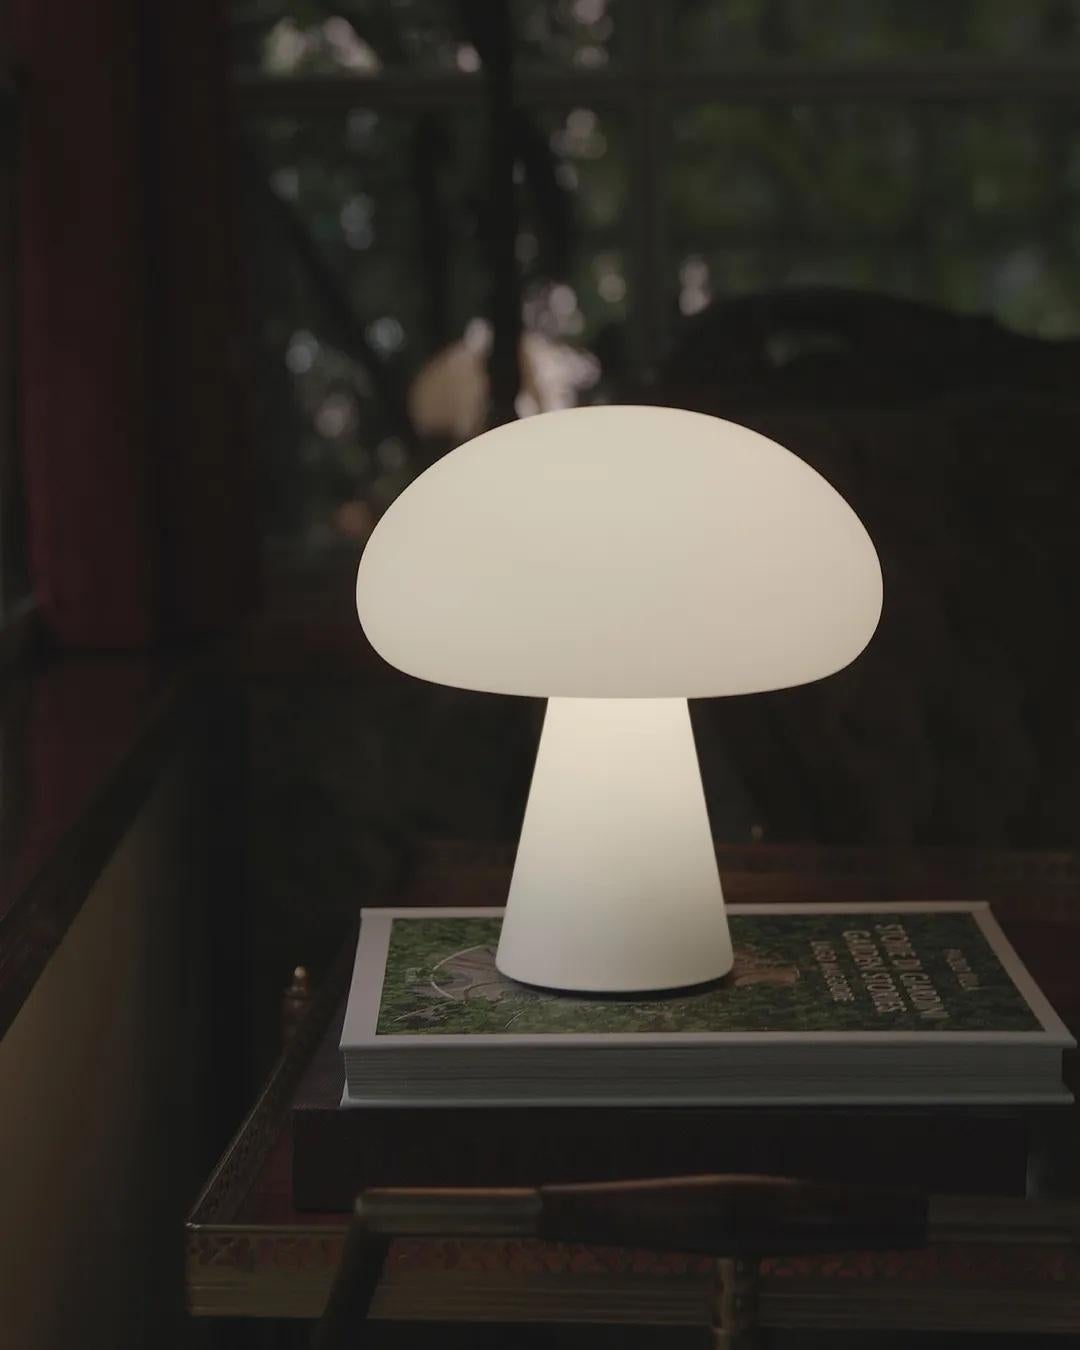 With a frosted, mouth-blown glass shade, as used for Curry’s original lamps, and integrated dimmable-LED light source, the rechargeable lamp can easily be moved between inside and out. With a complete charge in four and a half hours, providing up to